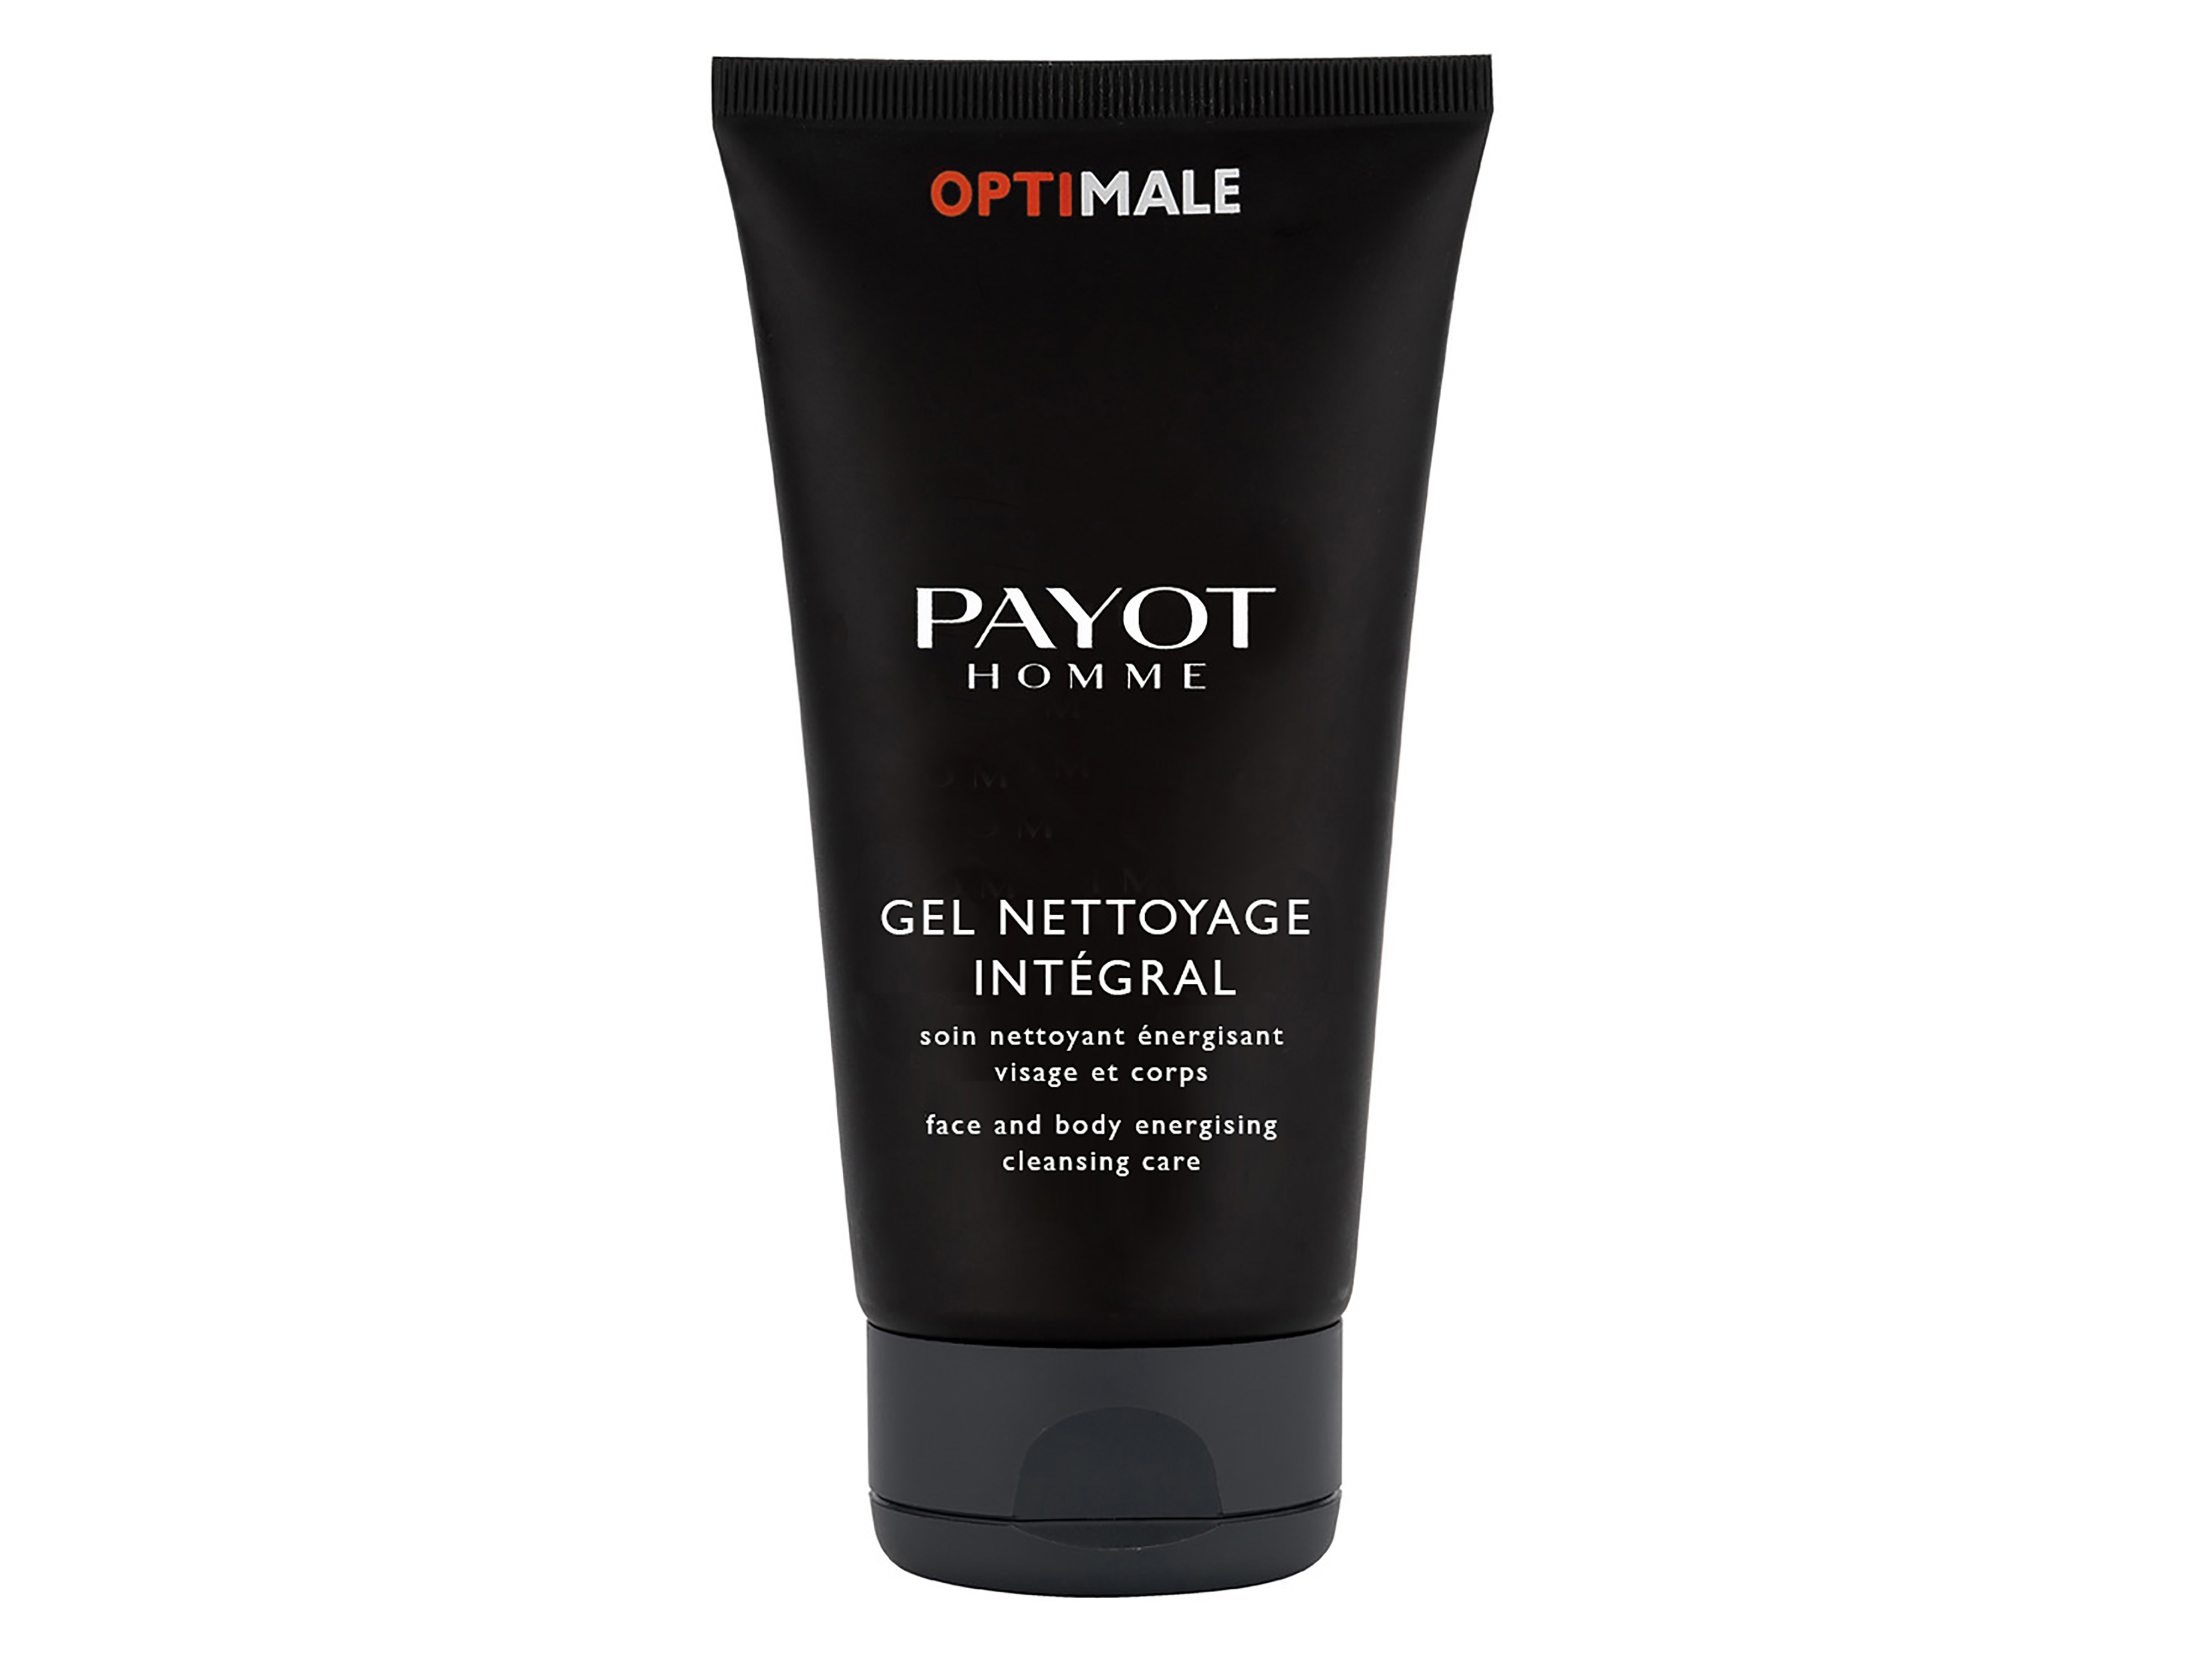 Payot Homme Optimale Gel Nettoyage Integral, 200 ml